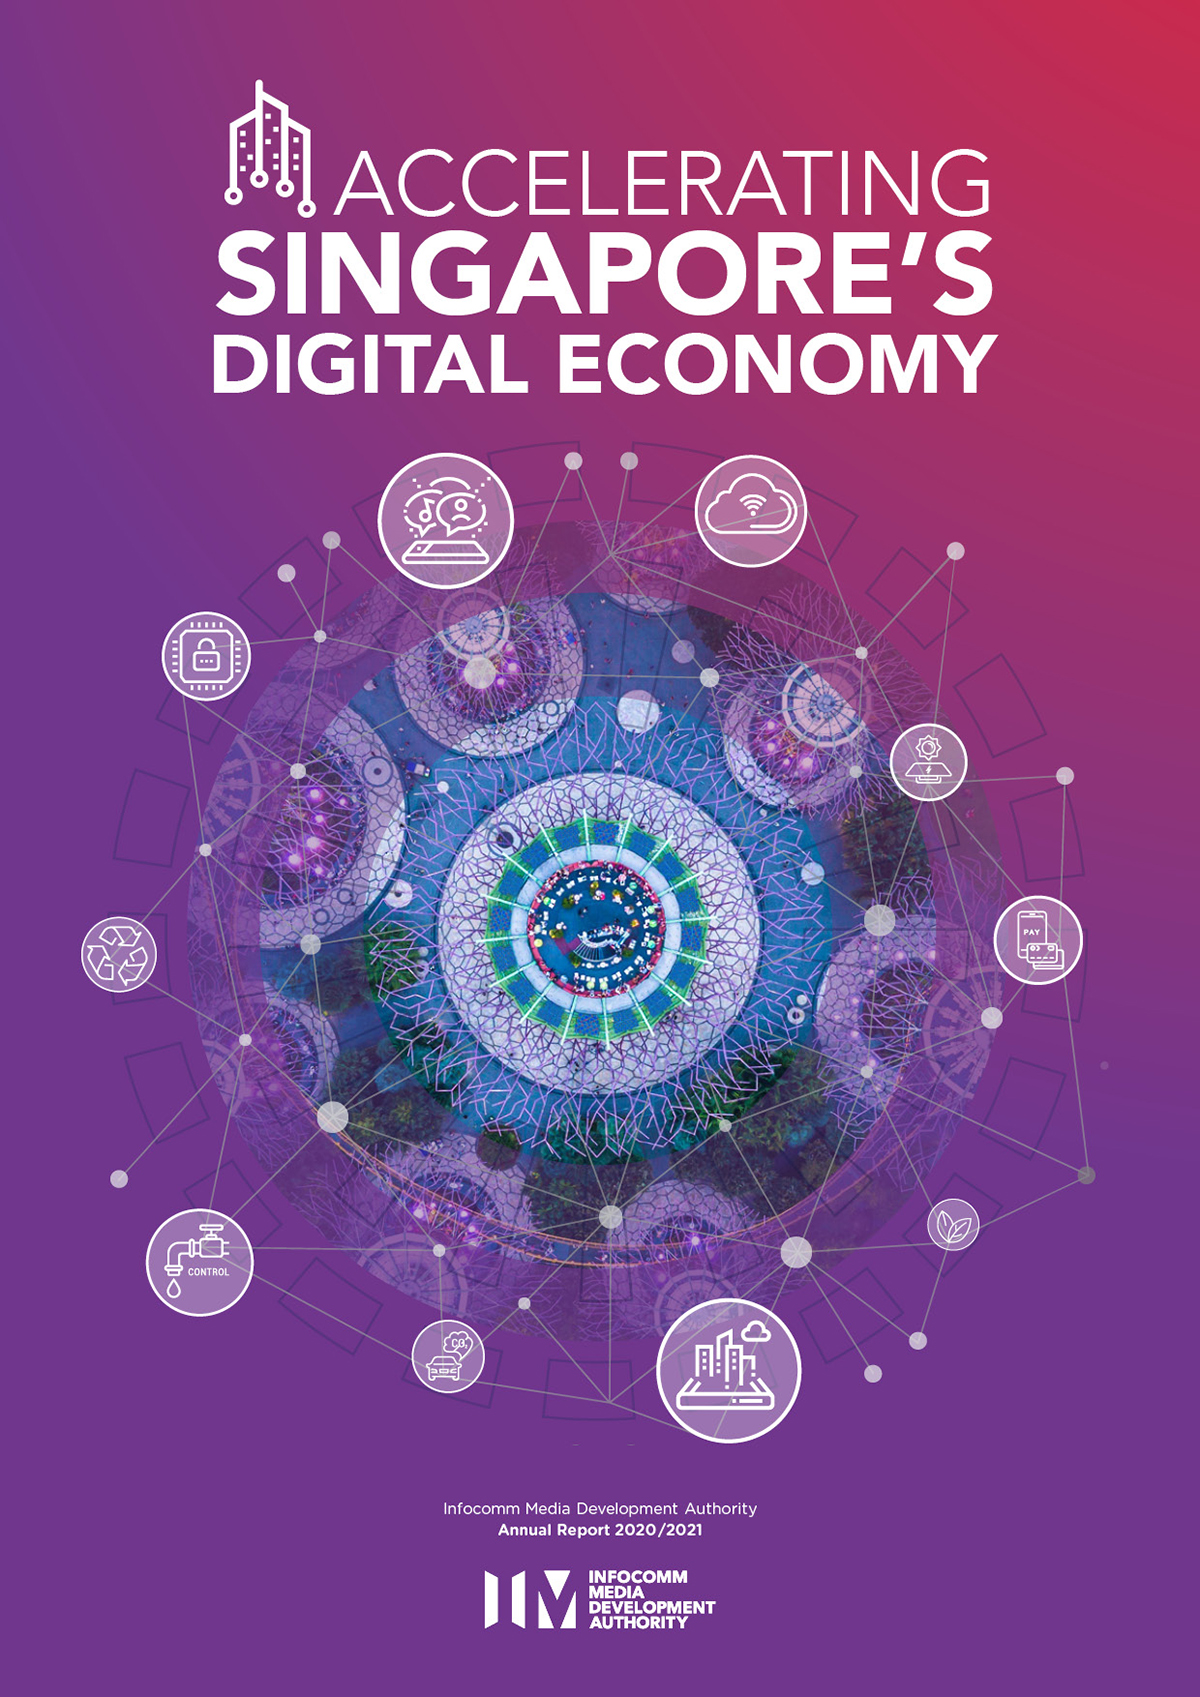 The front cover of IMDA's Annual Report 2020/2021, titled 'Accelerating Singapore's Digital Economy' with illustrations of SG's tech scene